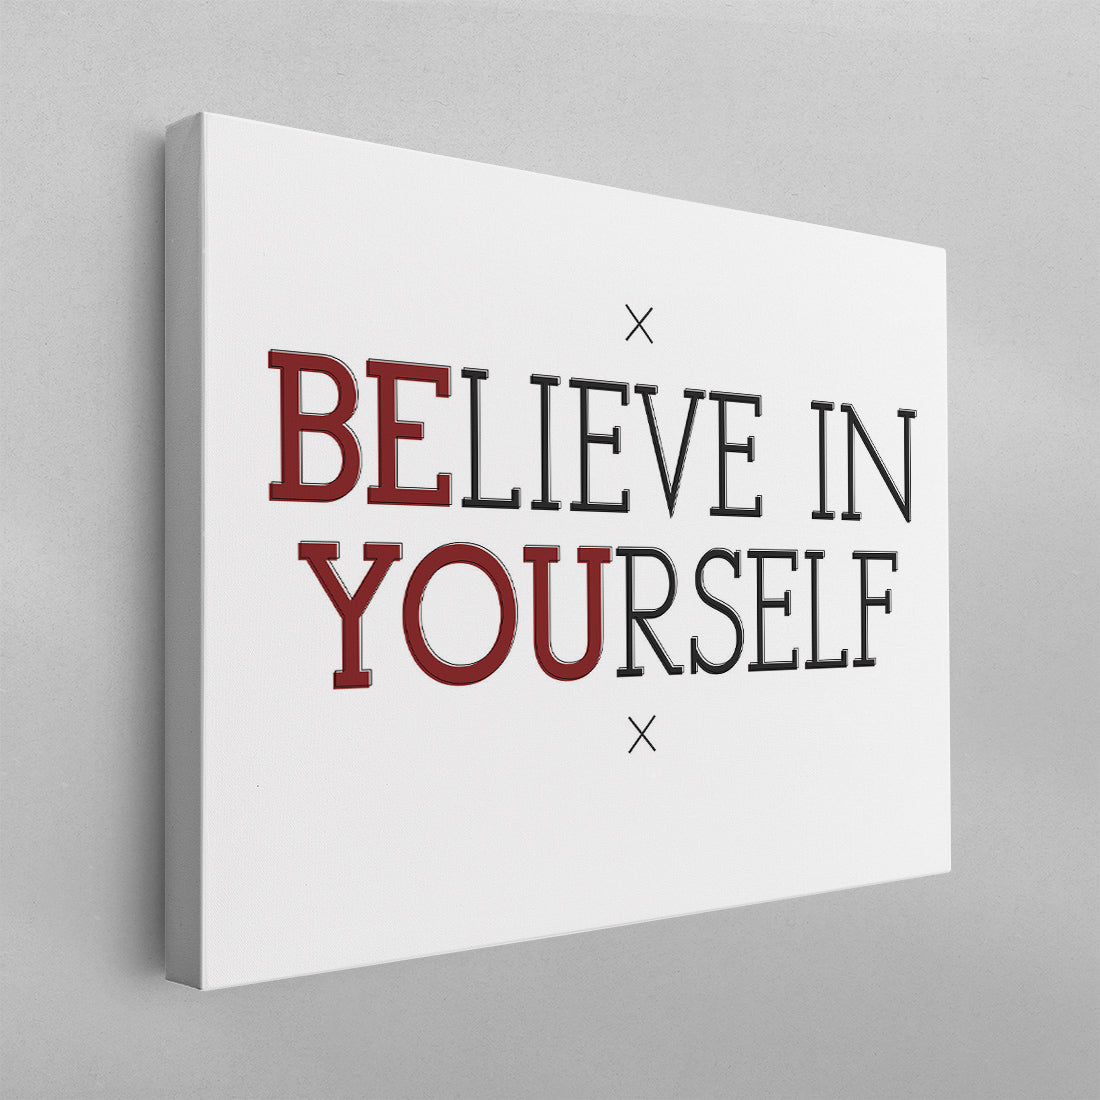 BElieve in YOUrself Poster